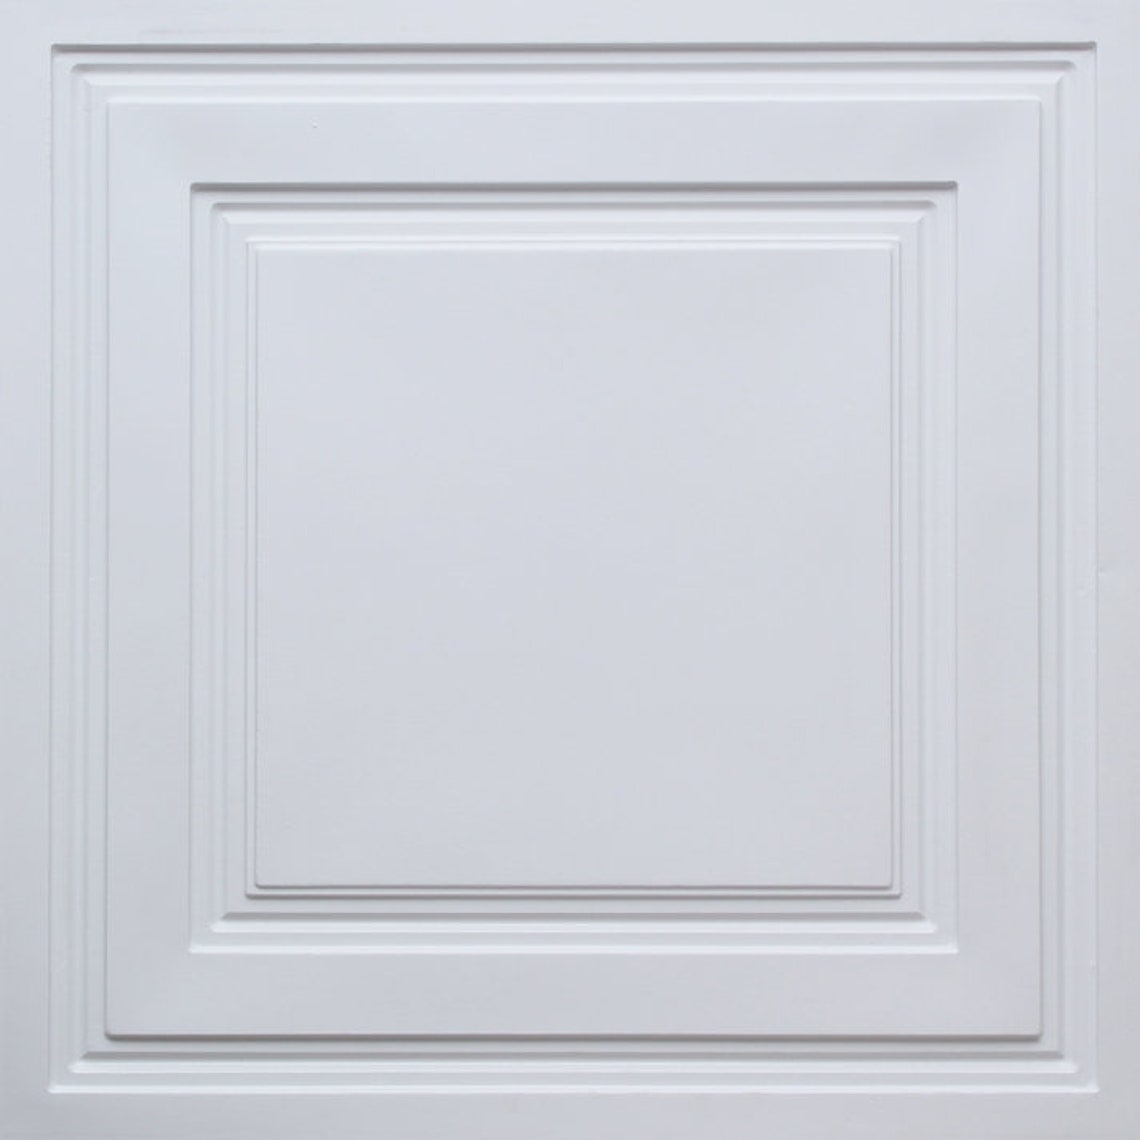 Drop in Decorative PVC Ceiling Tiles in White Matte. Drop in - Etsy